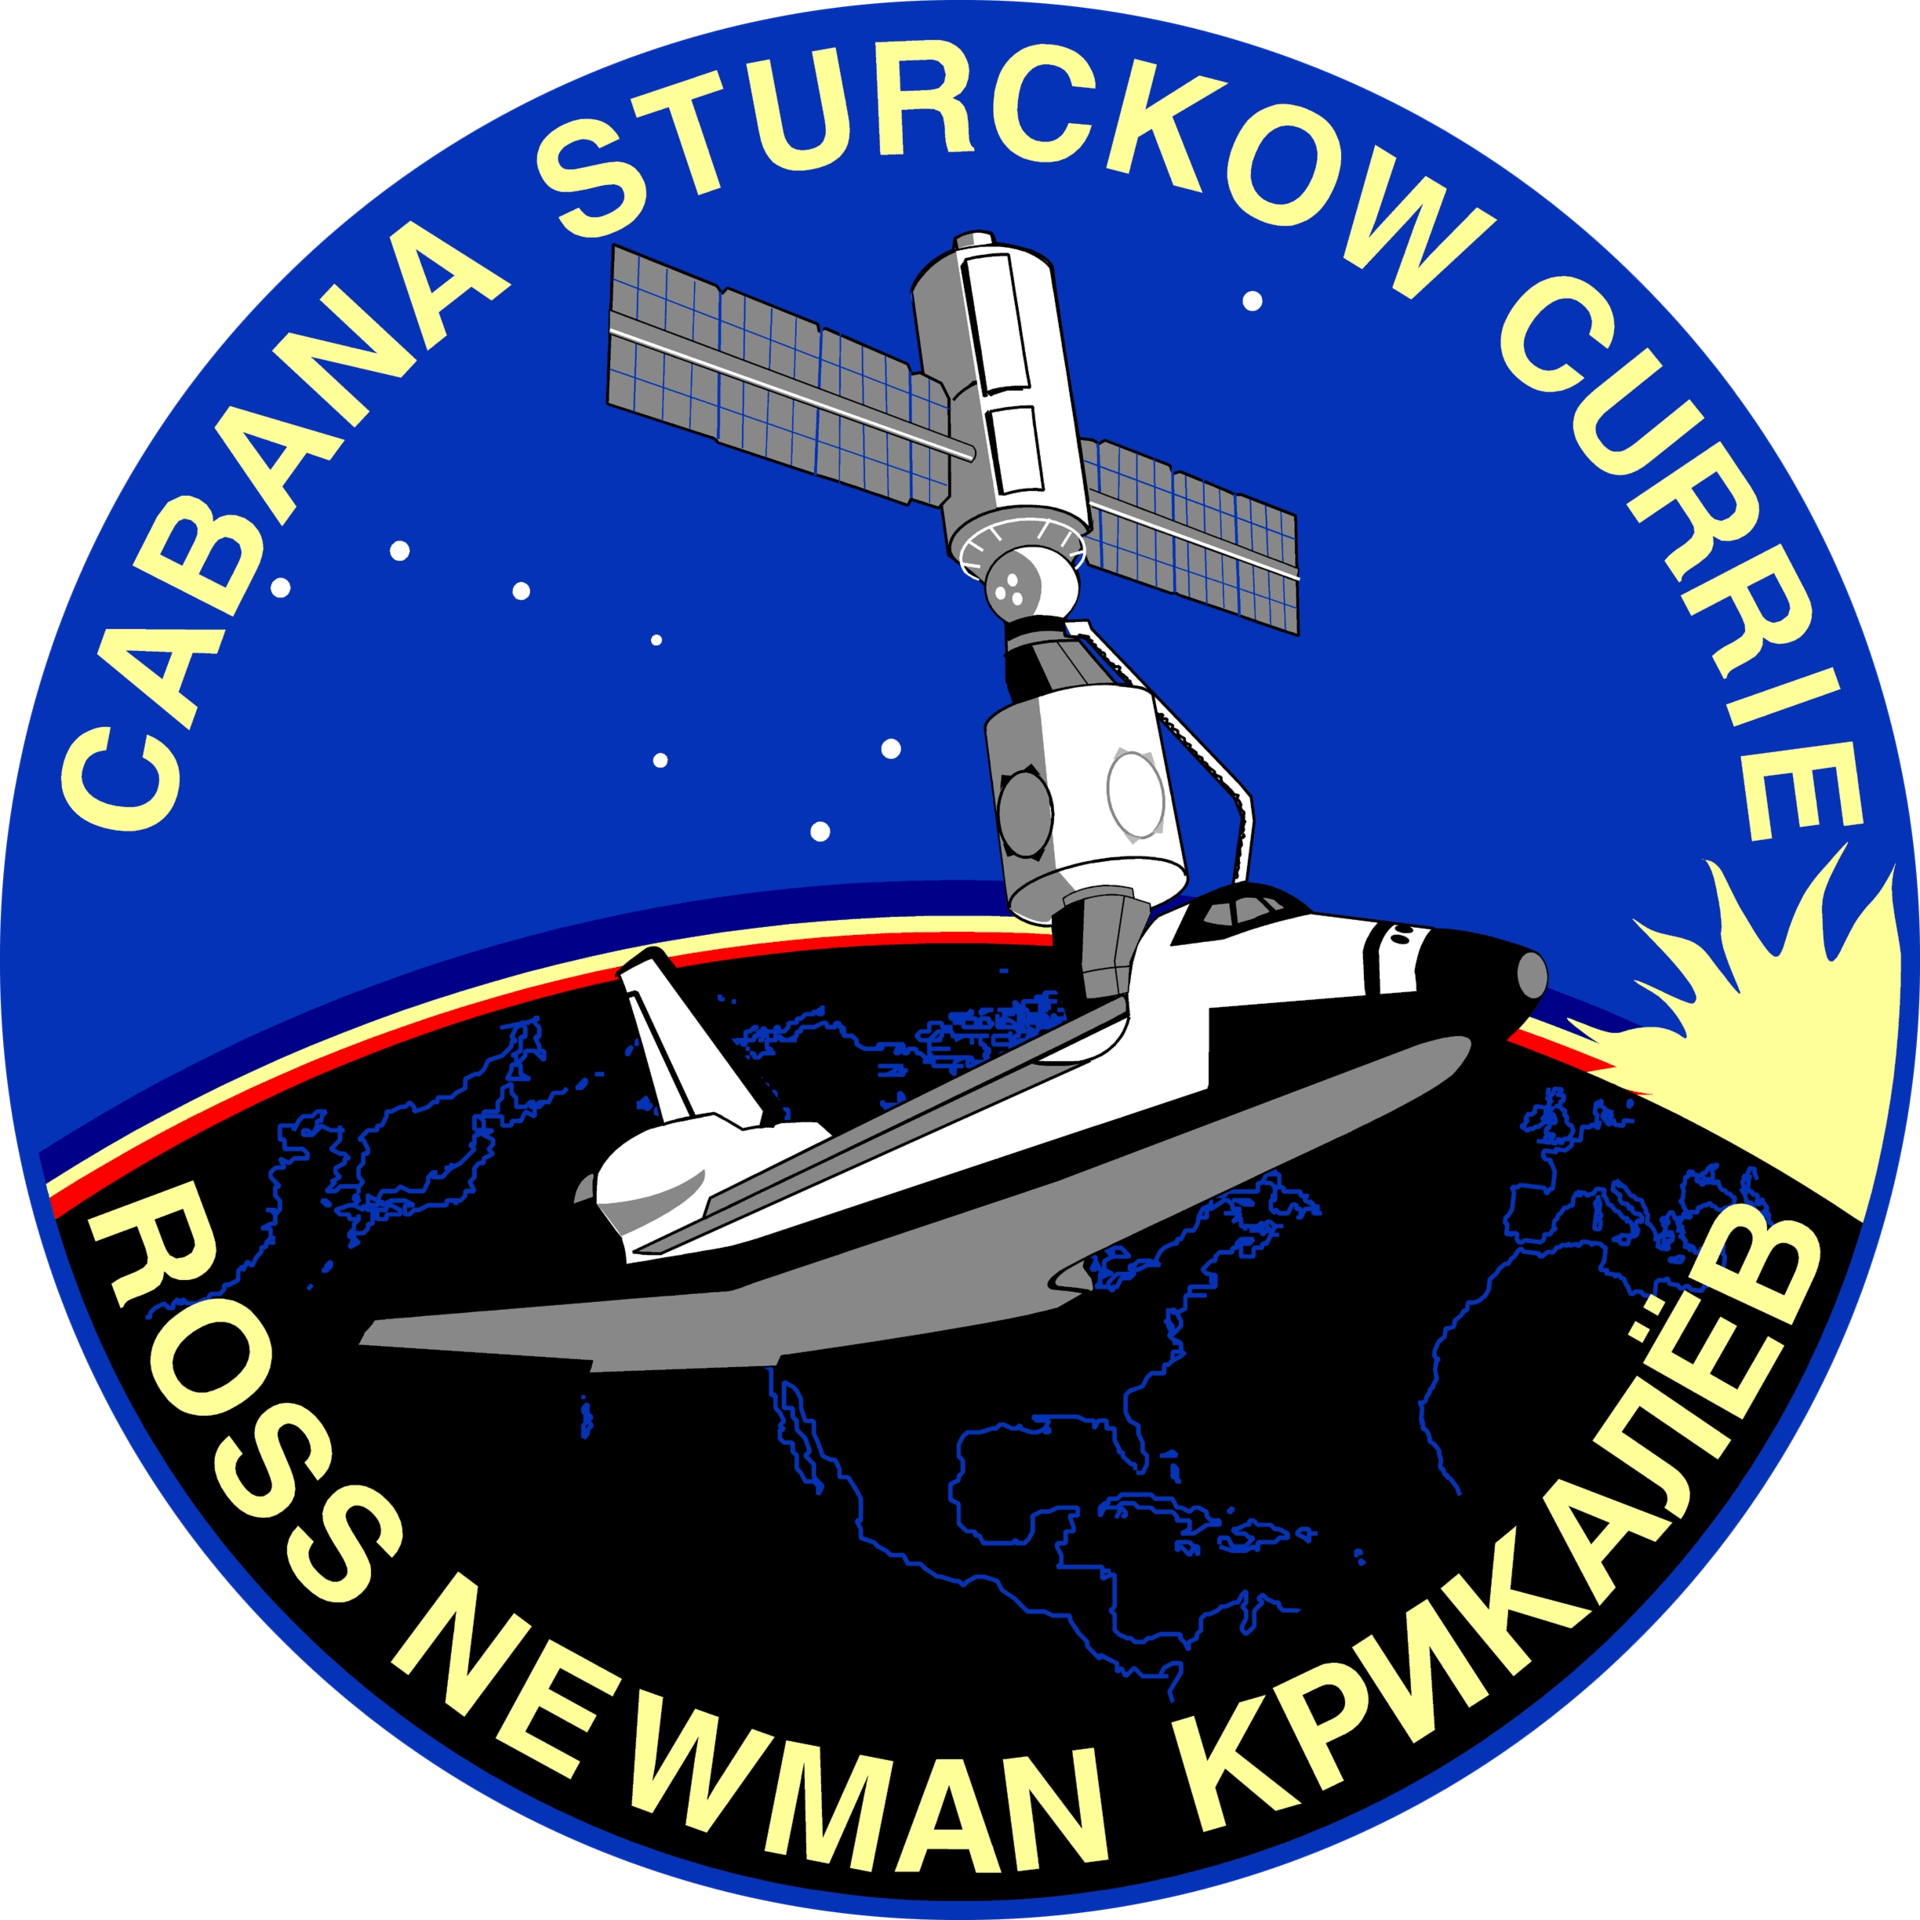 Mission patch for STS-88